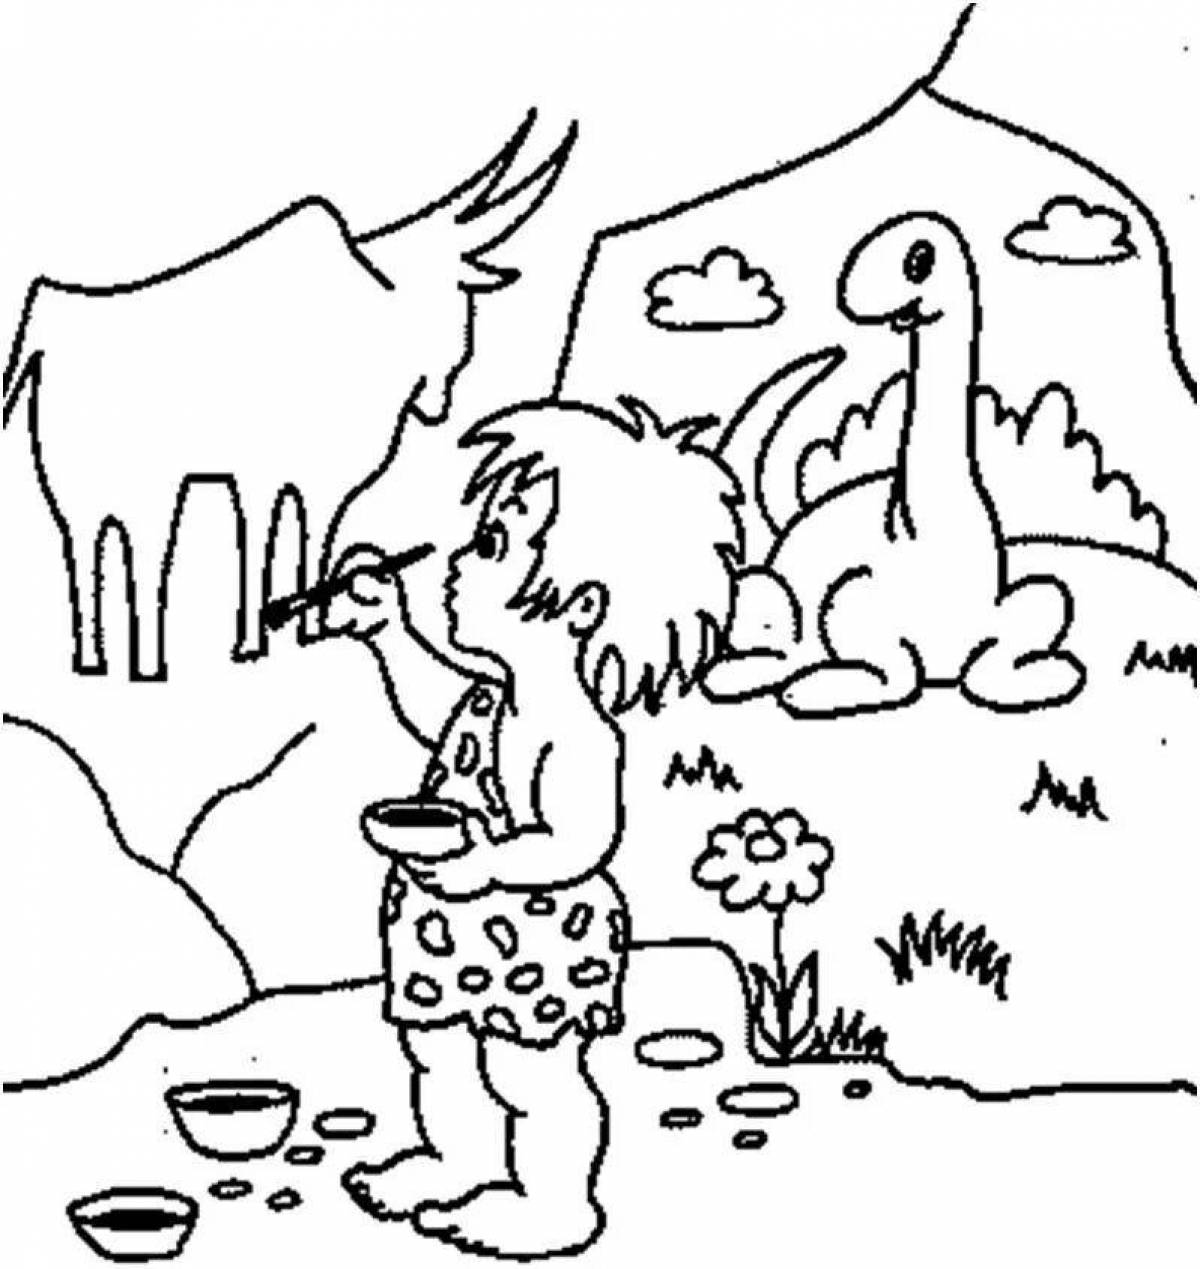 Coloring page spectacular ancient people